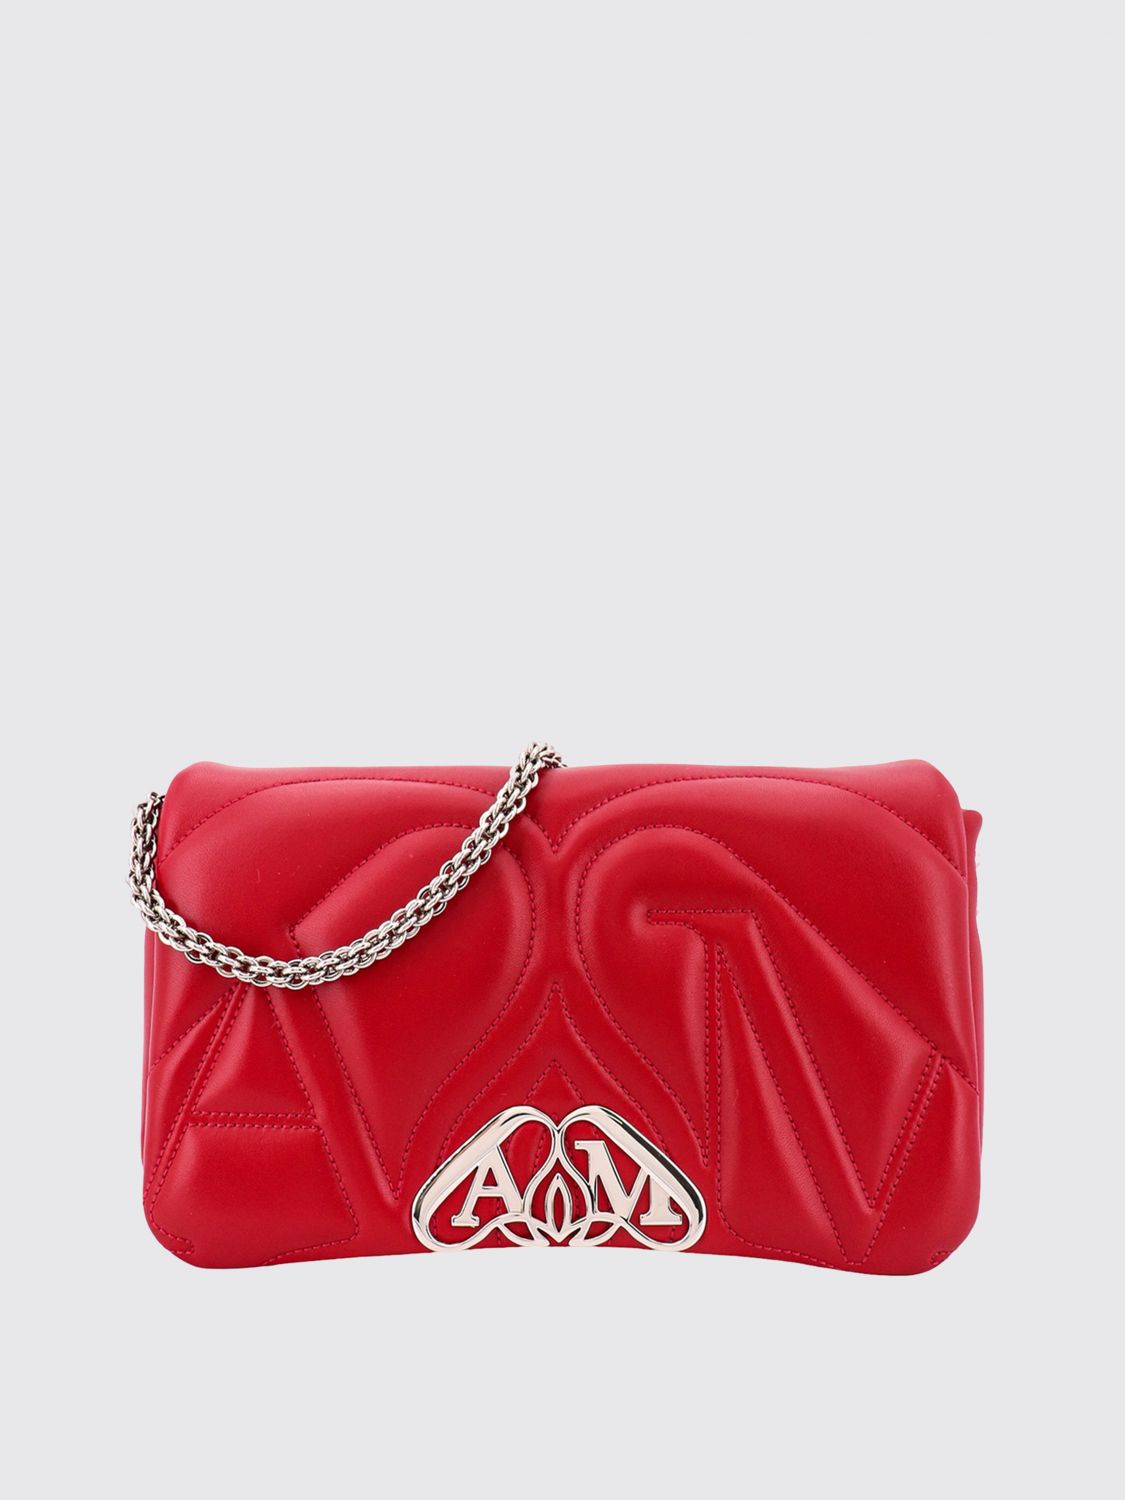 Alexander Mcqueen Seal Bag In Leather With Quilted Monogram In Red